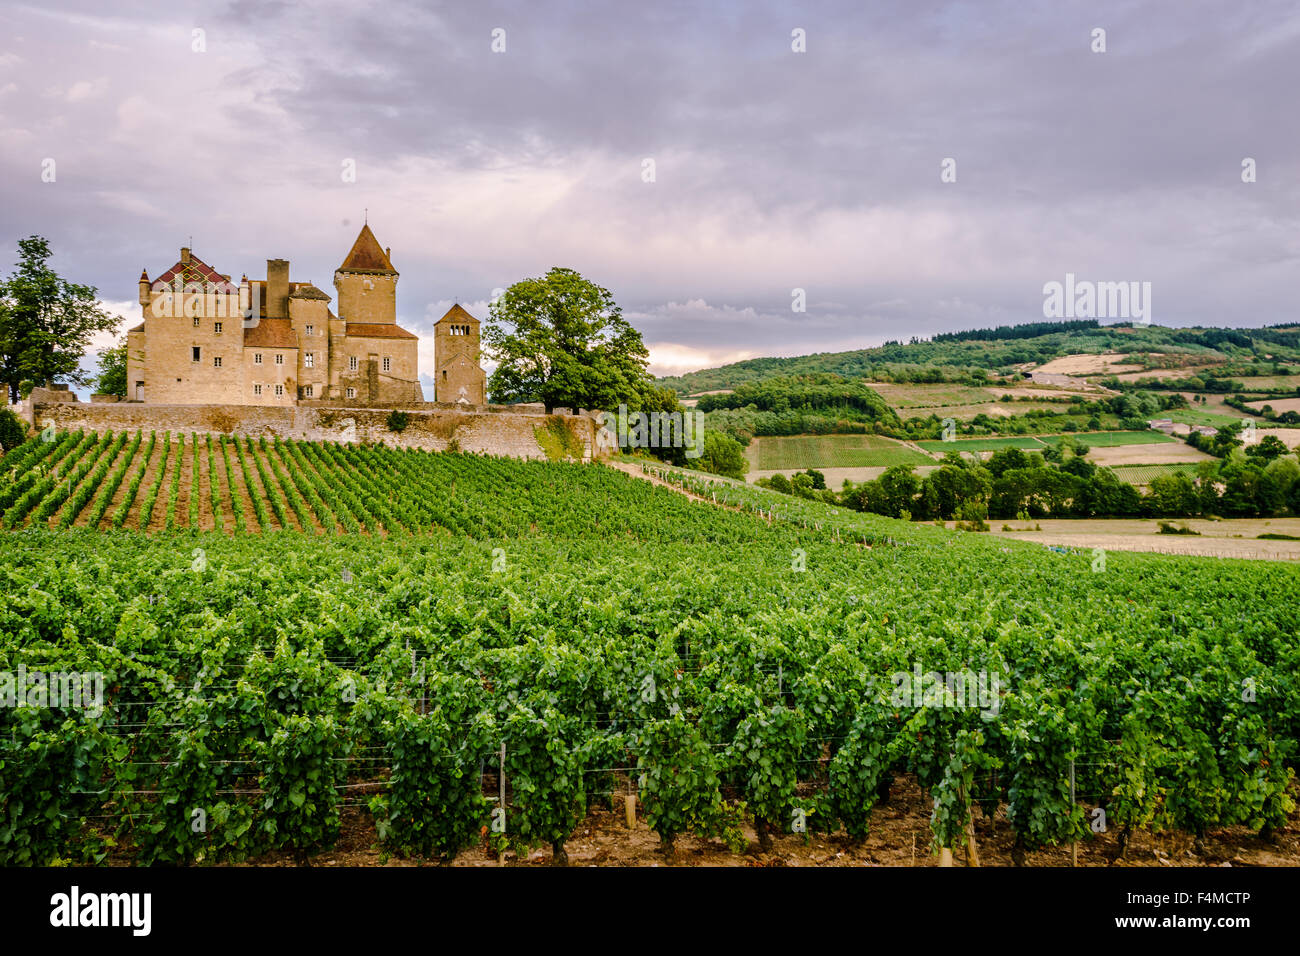 The Chateau de Pierreclos and it sprawling vineyard. July, 2015. Burgundy, France. Stock Photo